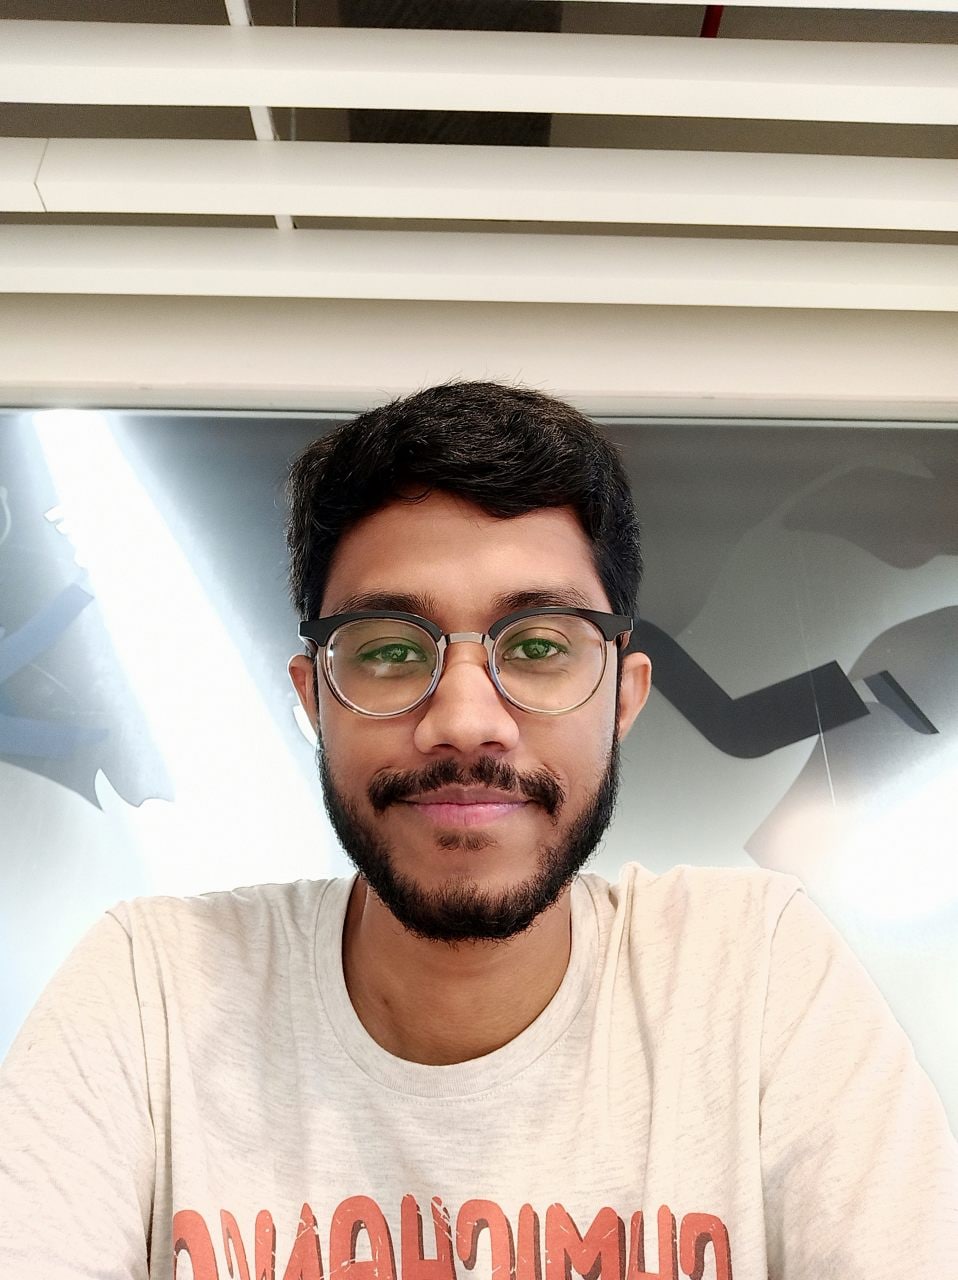 Selfie with the Redmi Note 8 Pro.